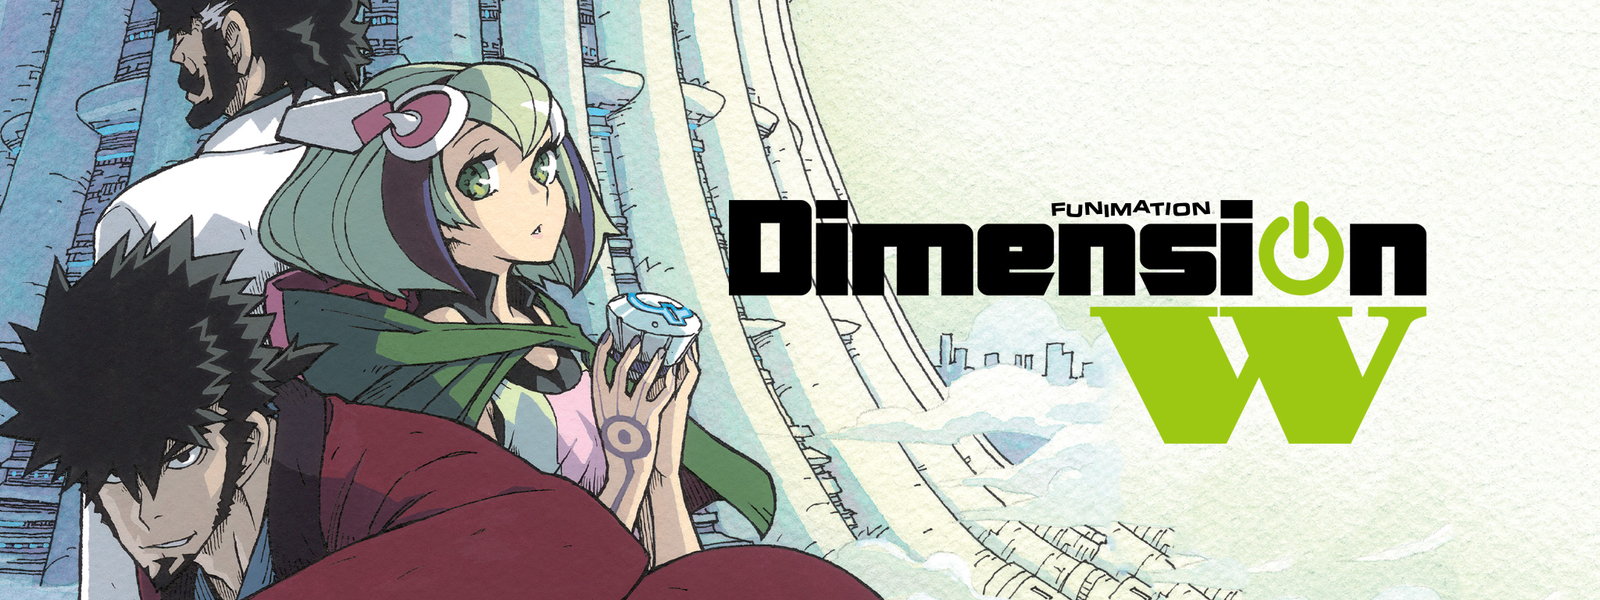 Dimension W  Anime Review  Pinnedupinkcom  Pinned Up Ink